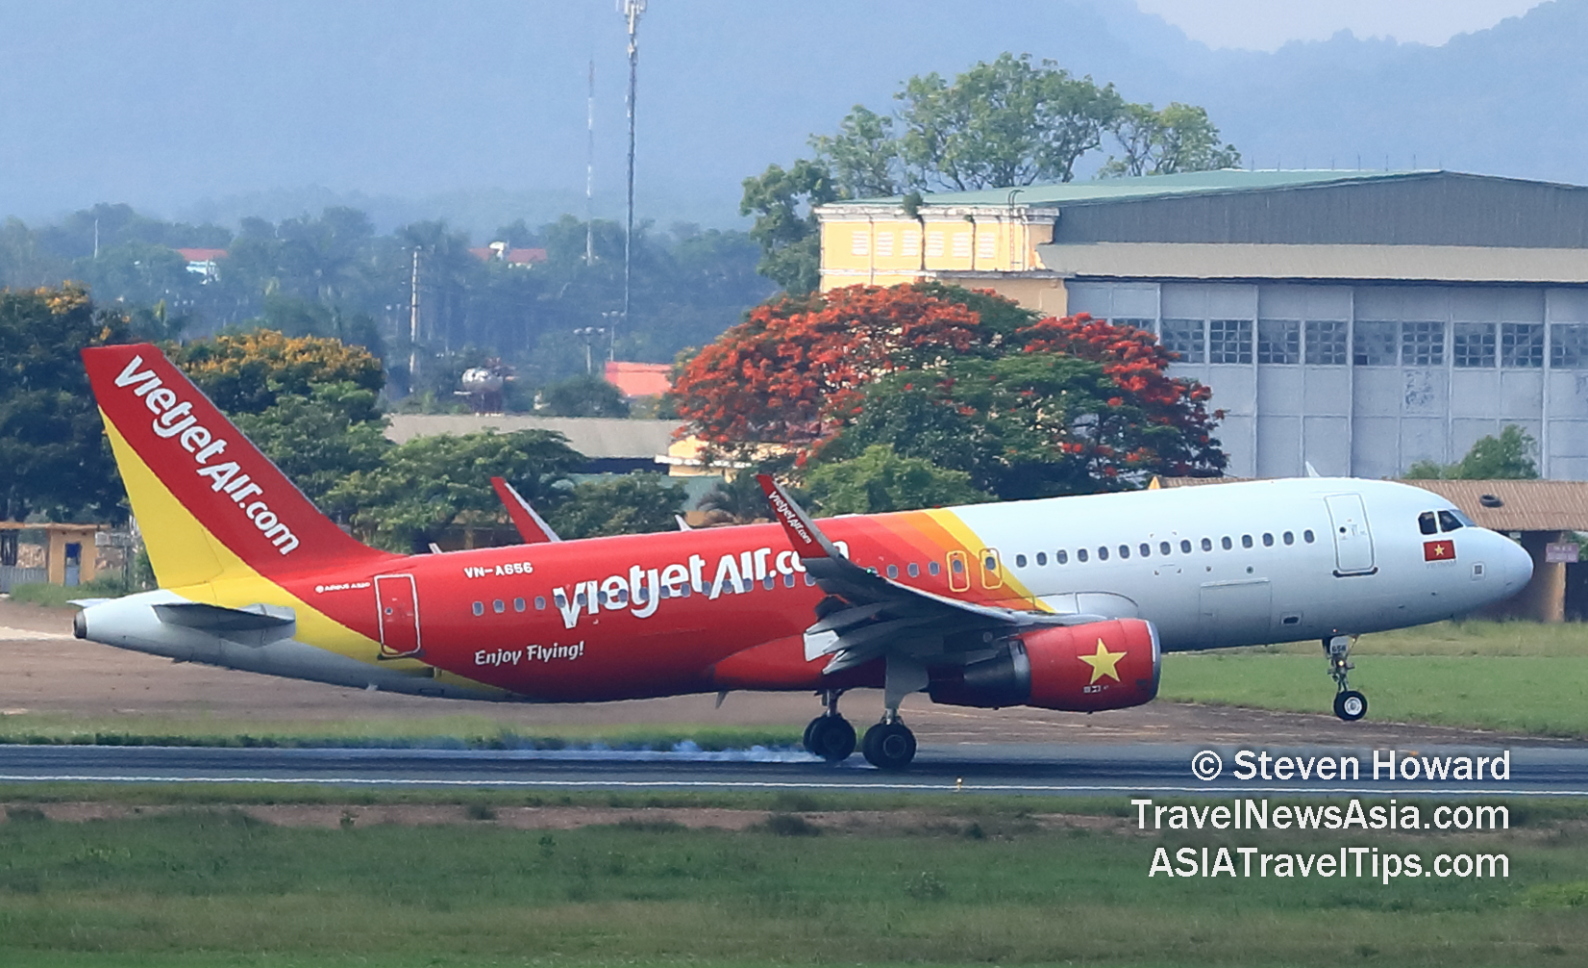 Vietjet Airbus A320 reg: VN-A656. Picture by Steven Howard of TravelNewsAsia.com Click to enlarge.